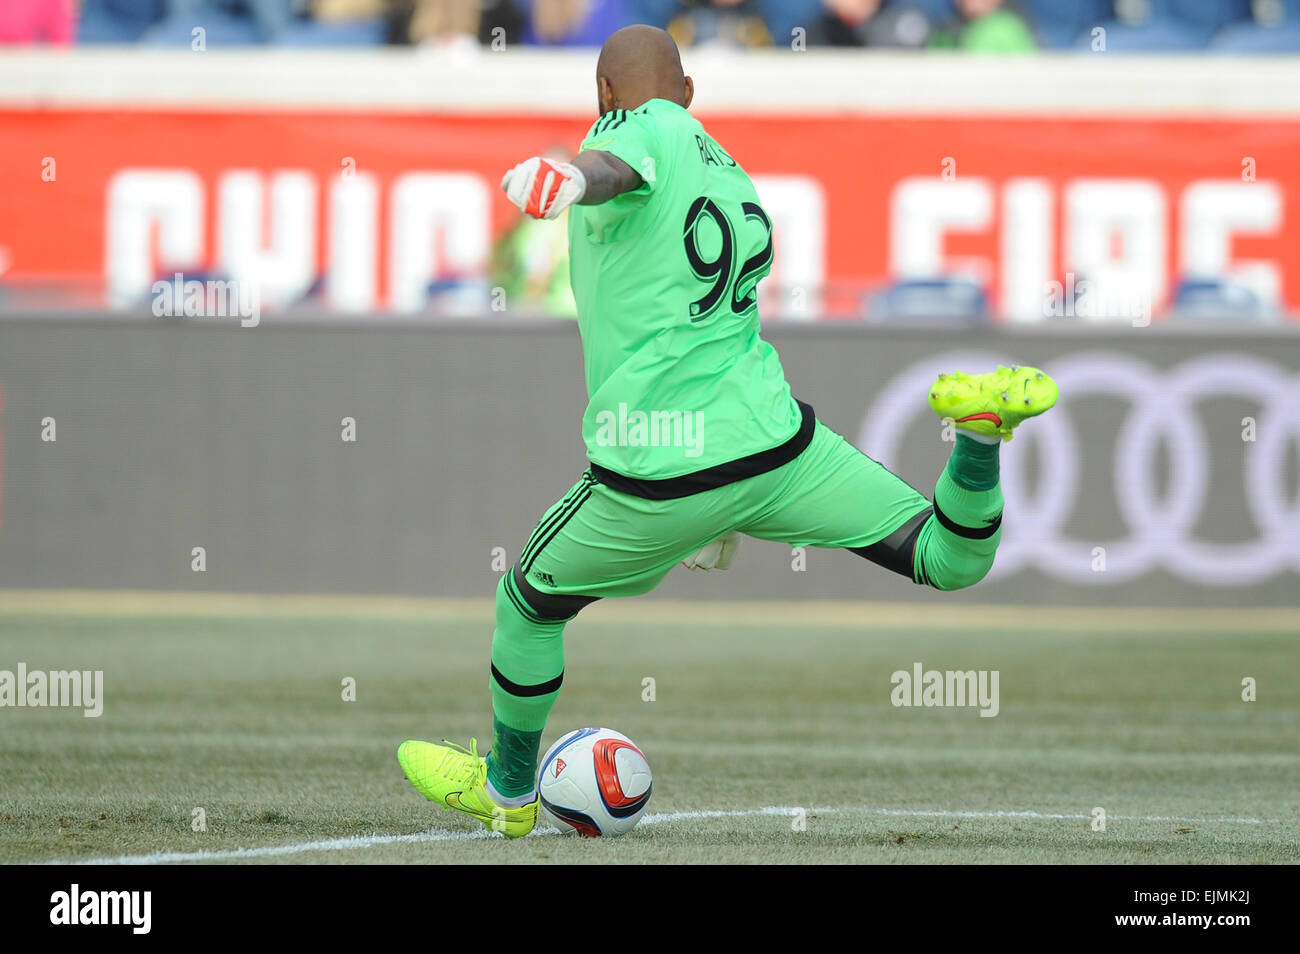 Bridgeview, Illinois, USA. 29th Mar, 2015. Philadelphia Union goalkeeper Rais Mbolhi (92) kicks the ball down field in the first half during the Major League Soccer game between the Philadelphia Union and the Chicago Fire at Toyota Park in Bridgeview, IL. Credit:  Cal Sport Media/Alamy Live News Stock Photo